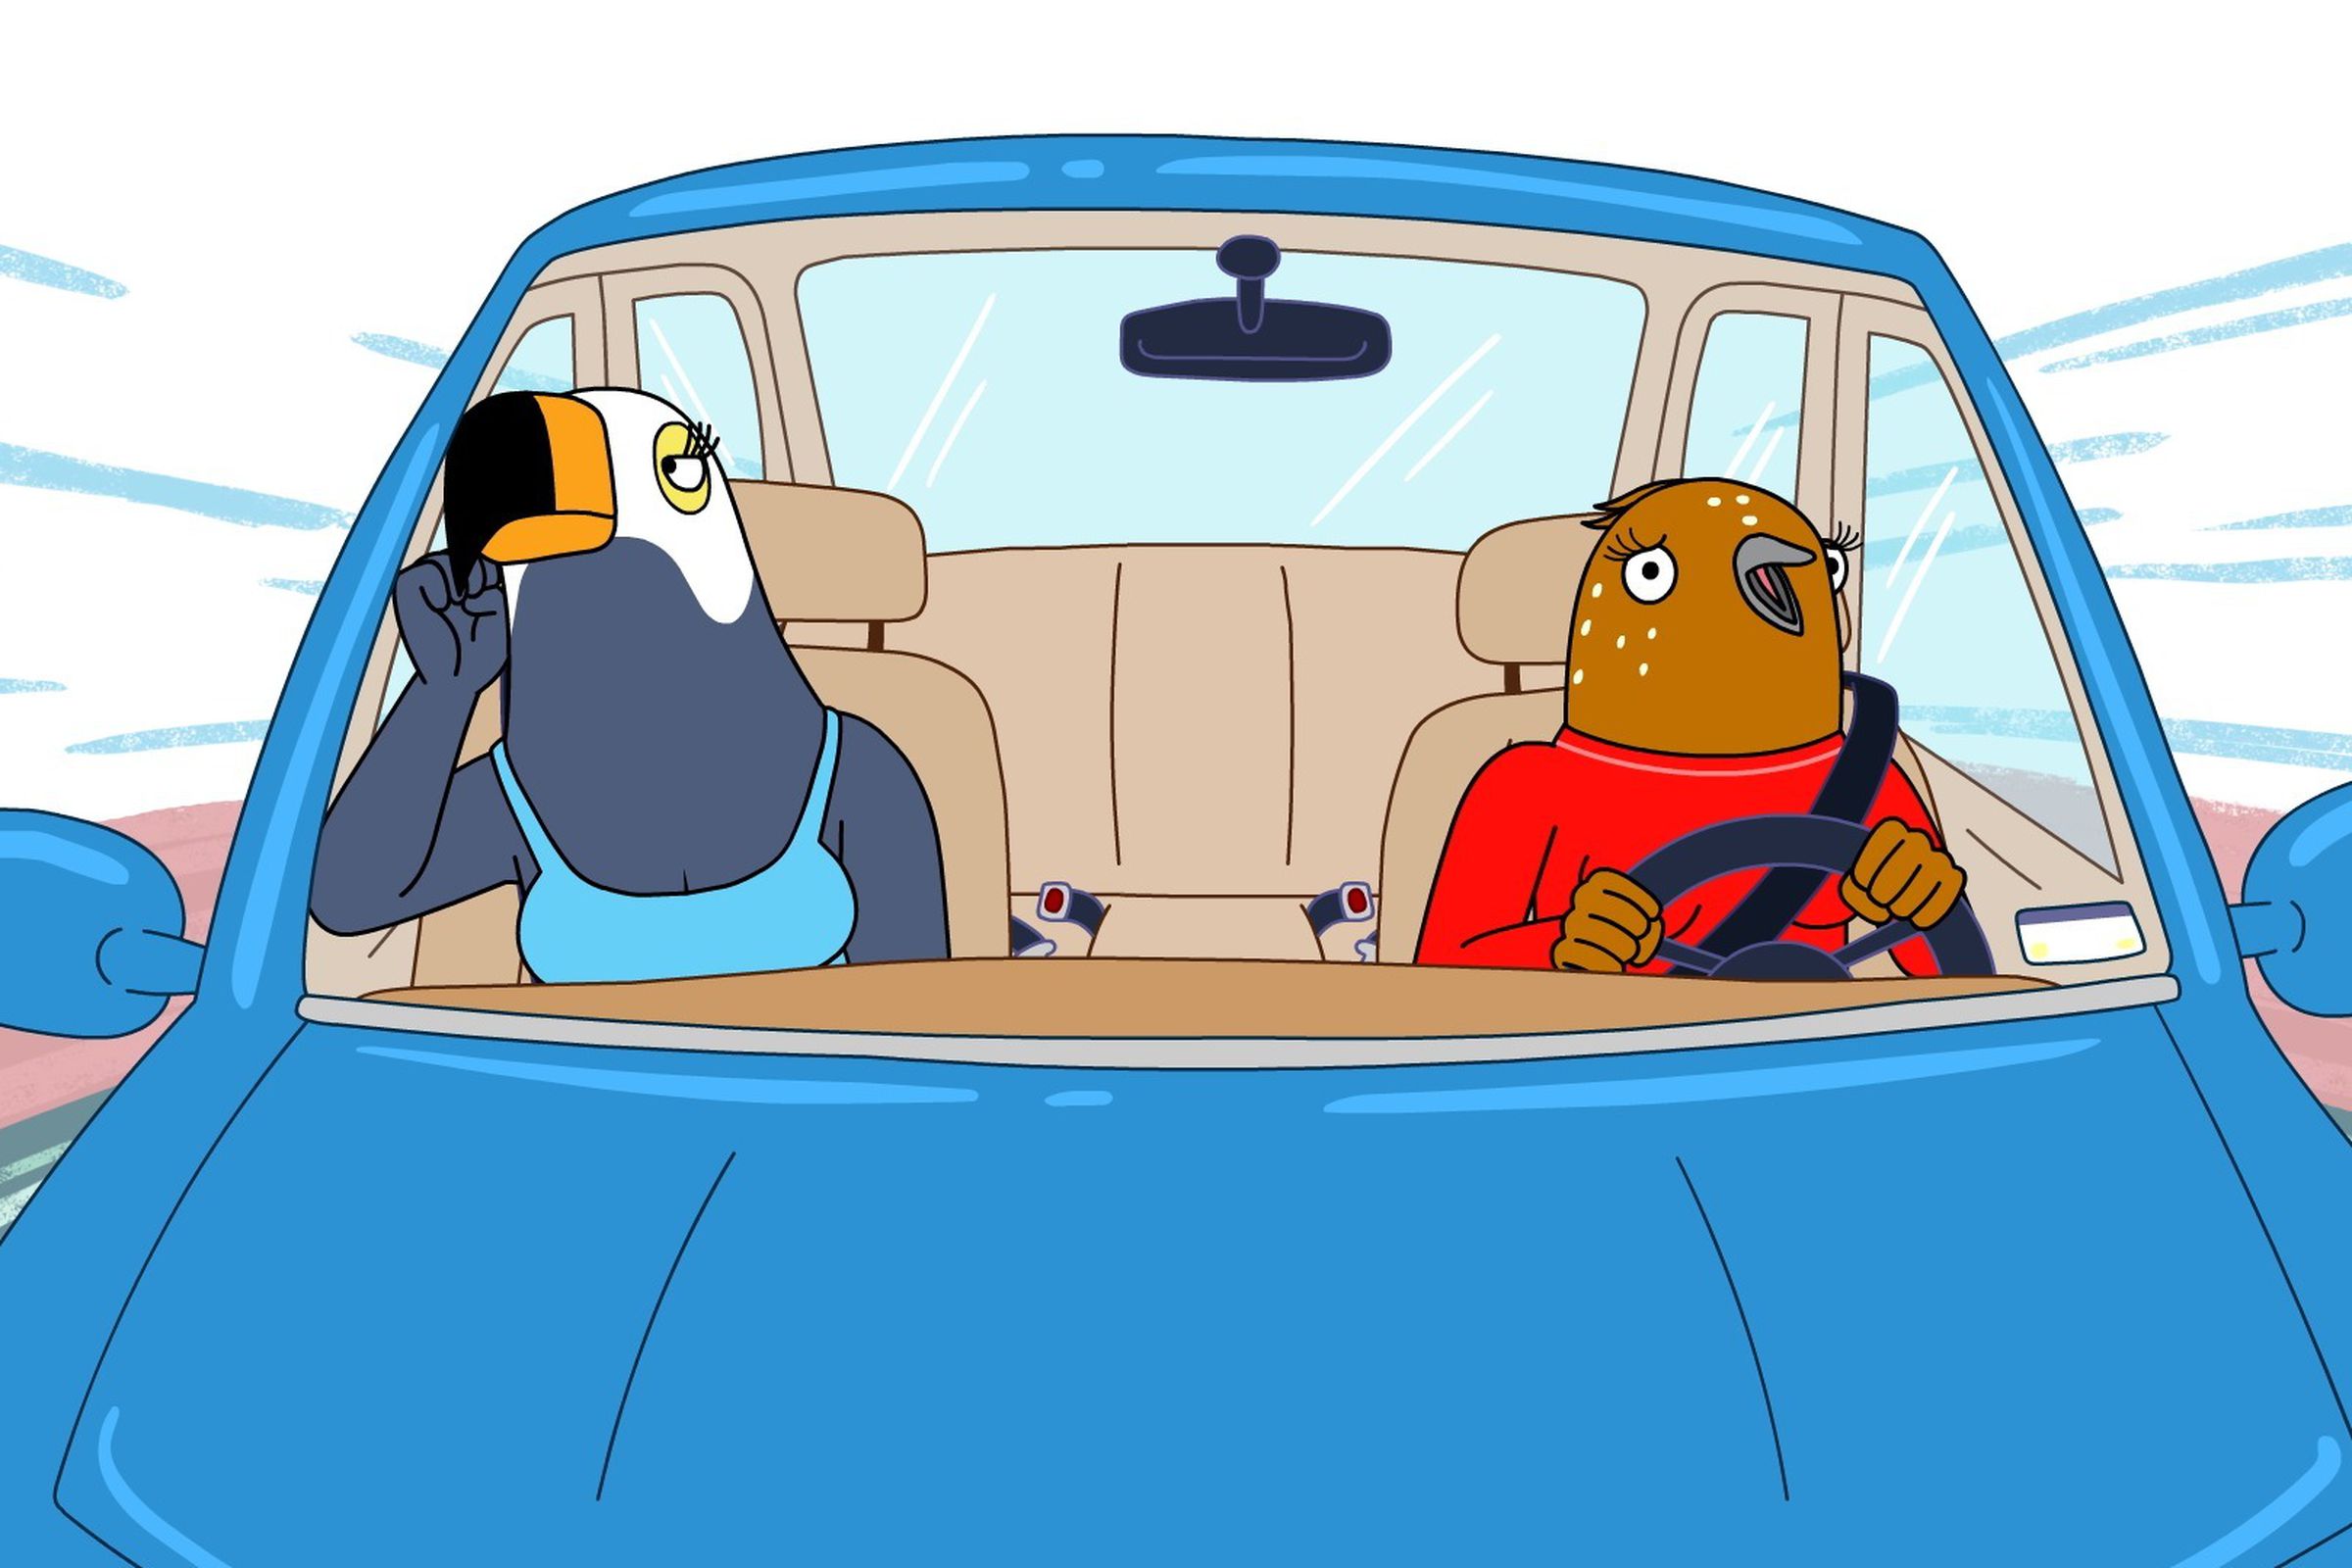 A miffed, anthropomorphized toucan woman sitting in the passenger seat of car being driven by an anthropomorphized song thrush woman.